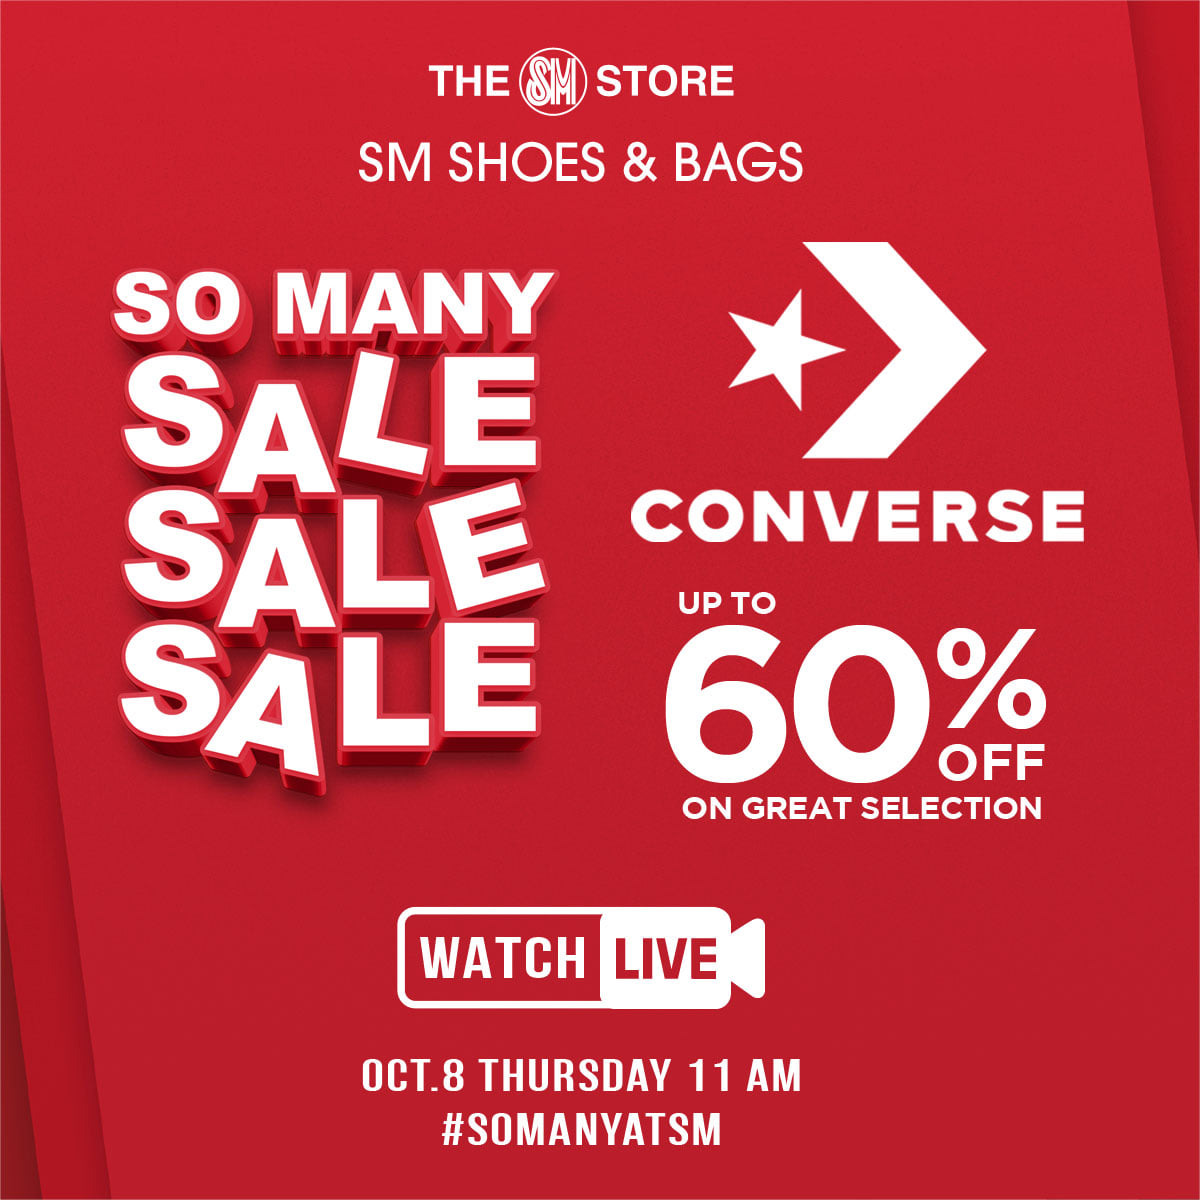 SM Shoes and Bags SO MANY SALE on CONVERSE - October 8 to 12